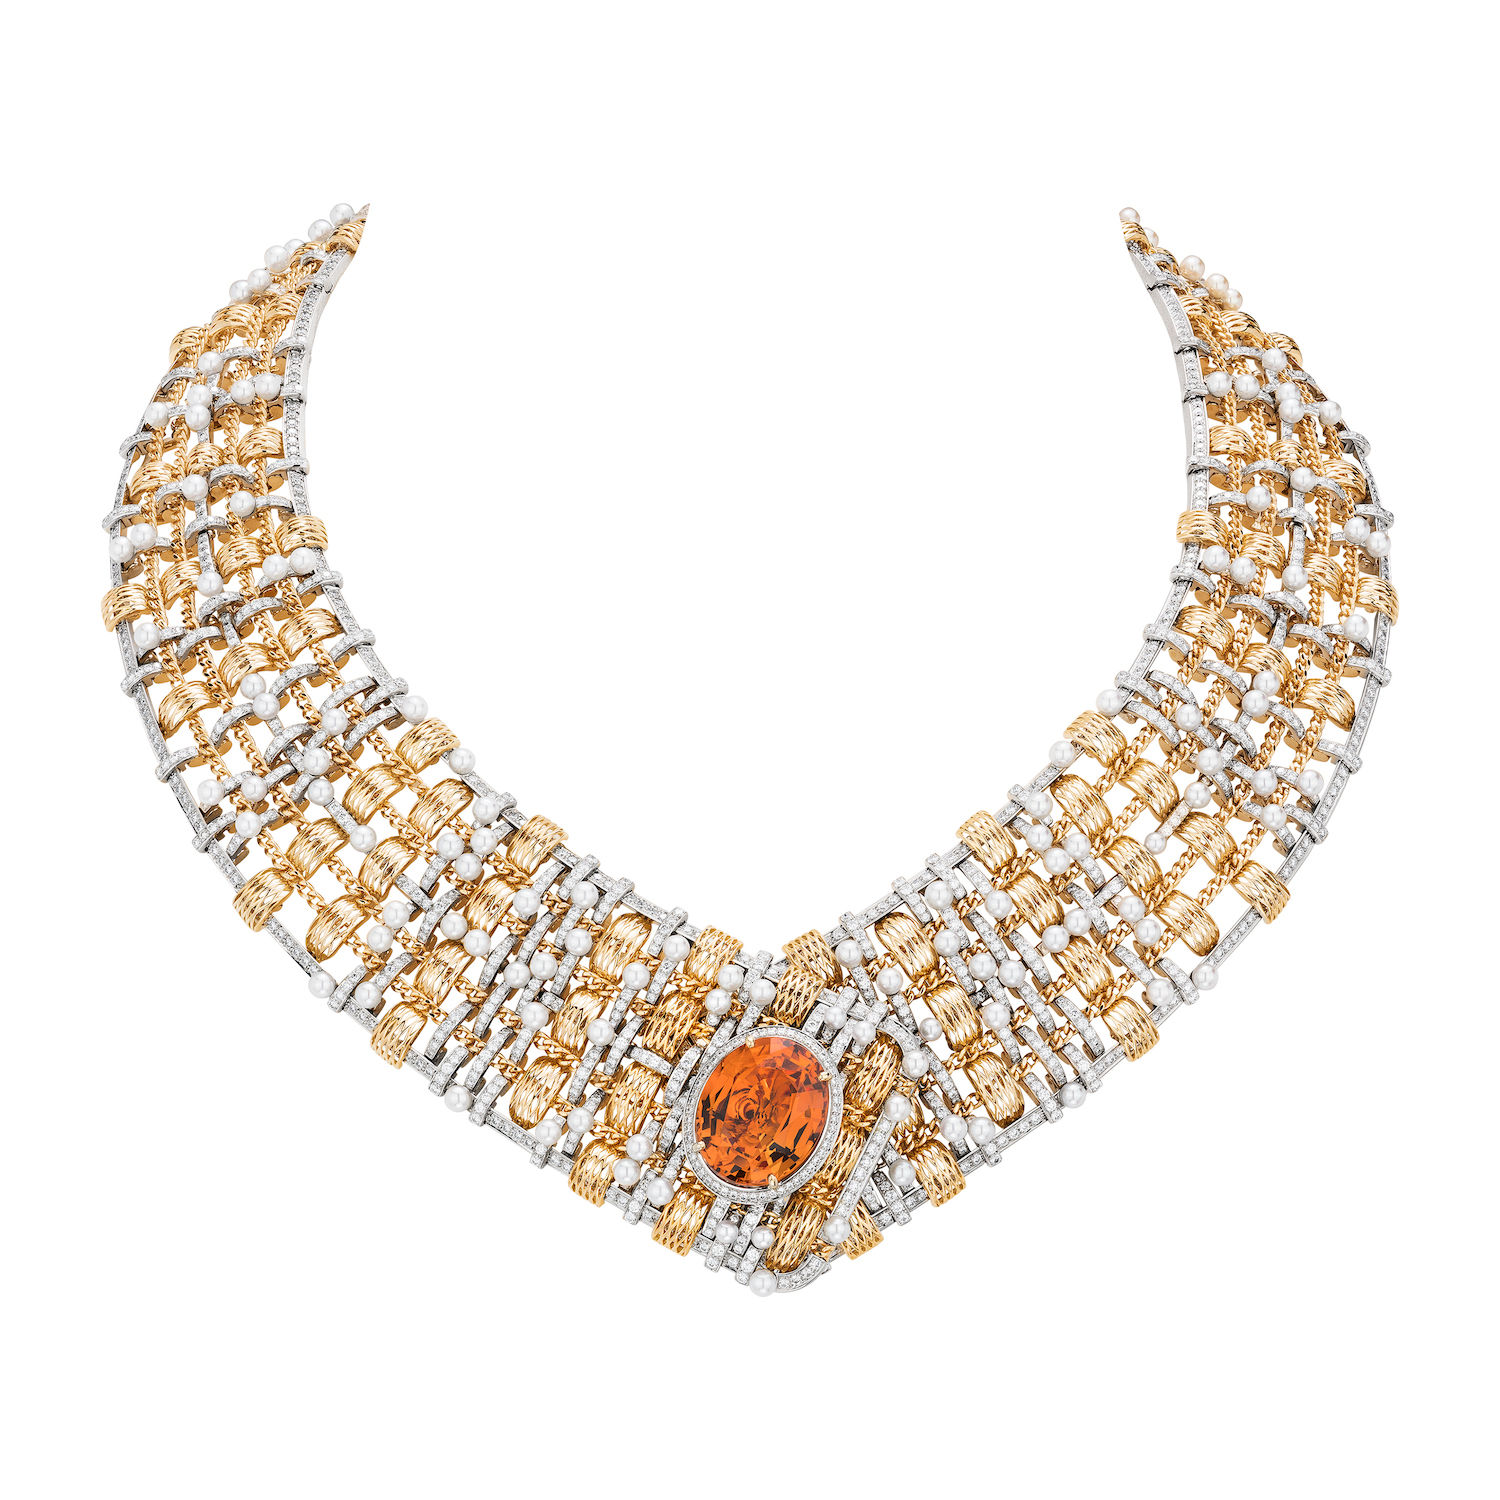 Tweed d'Or Necklace (Photo credit: Chanel)